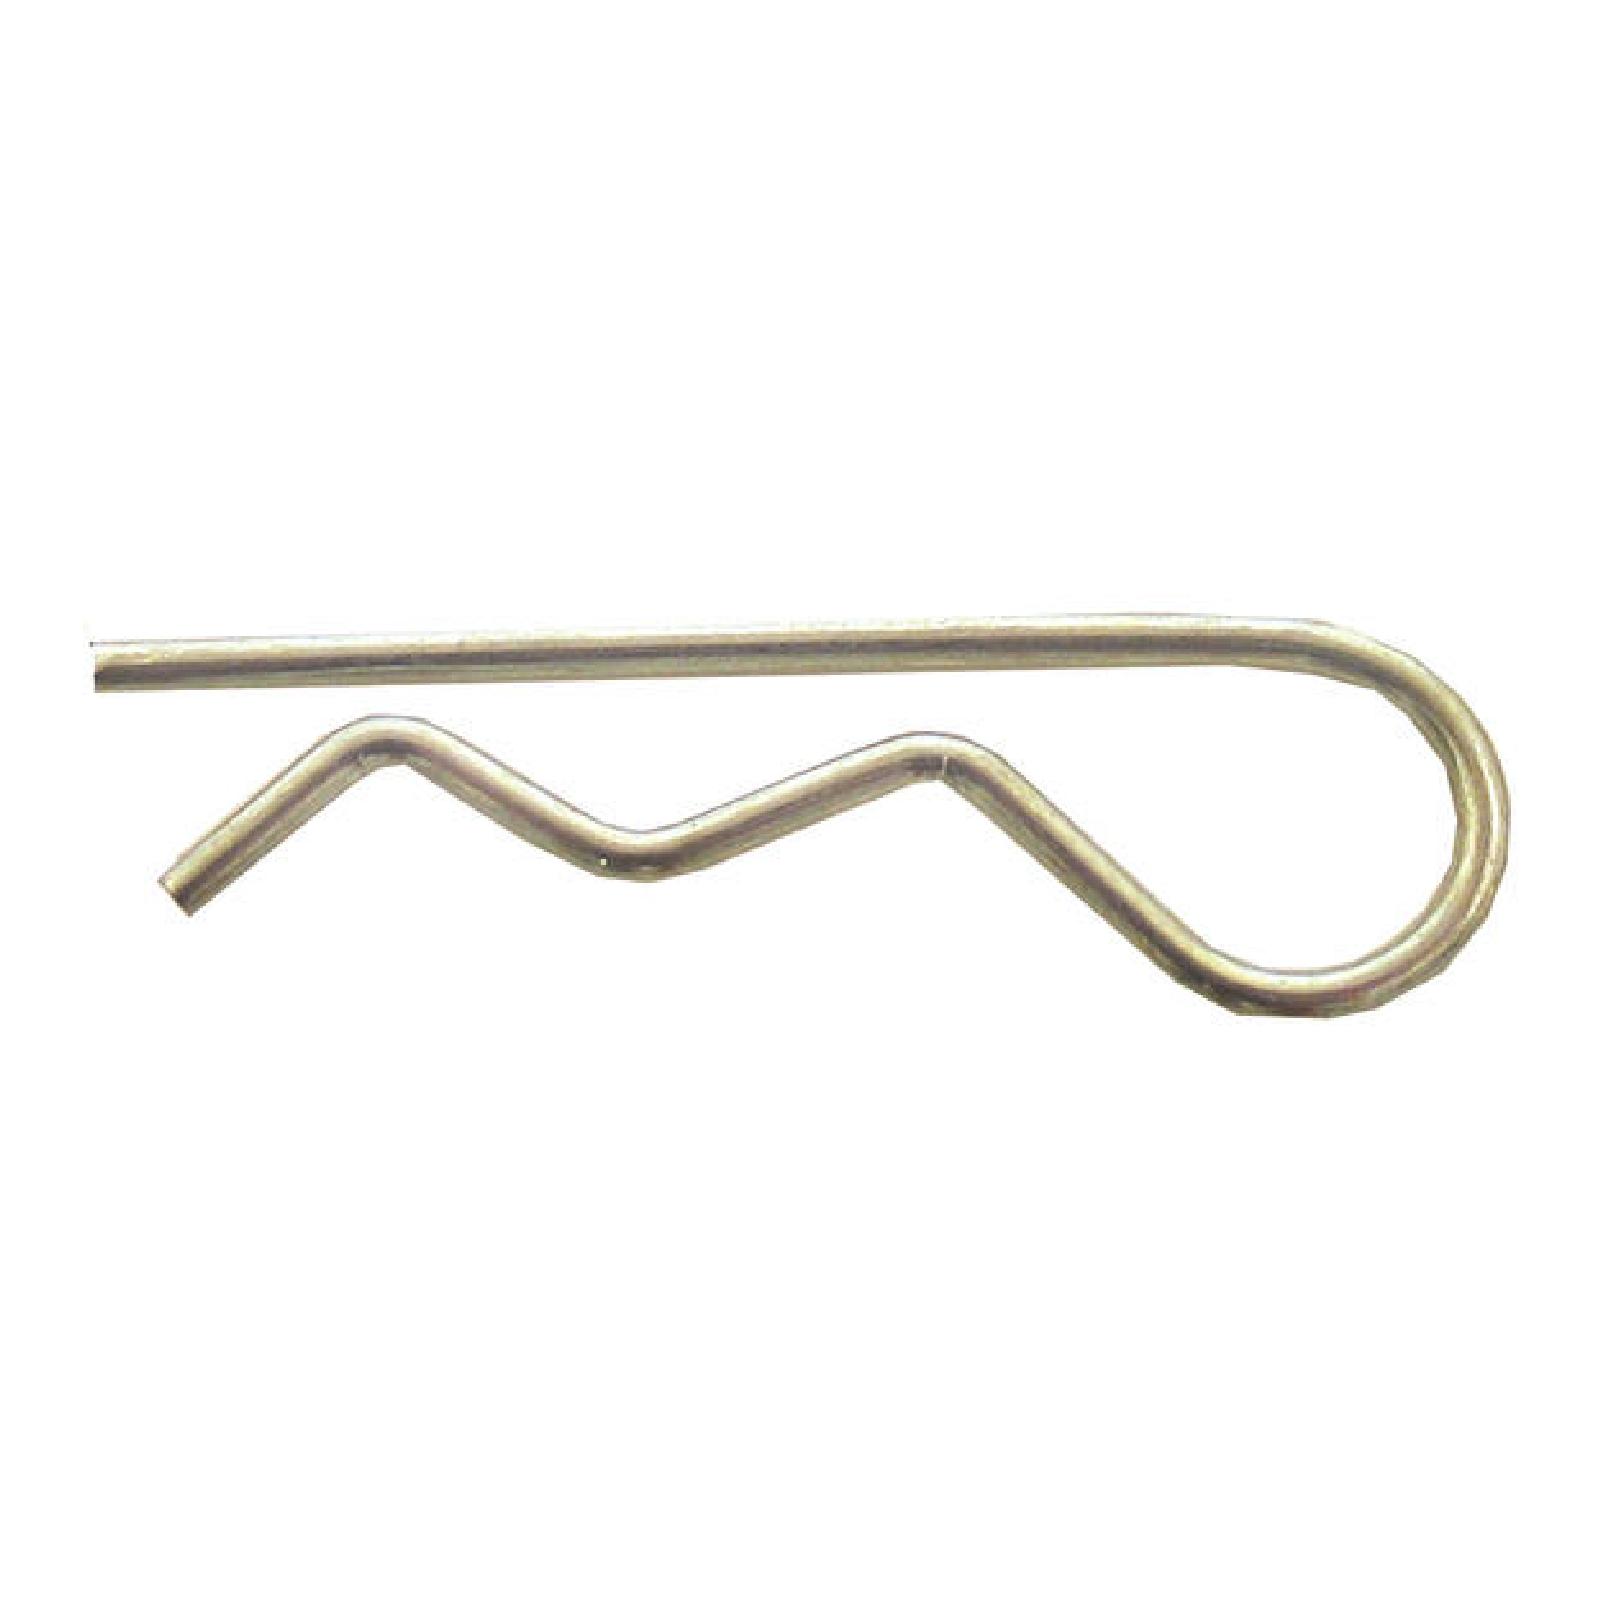 HAIR PIN CLIP .125 X 1 3/ part# 02417 by Oregon - Click Image to Close